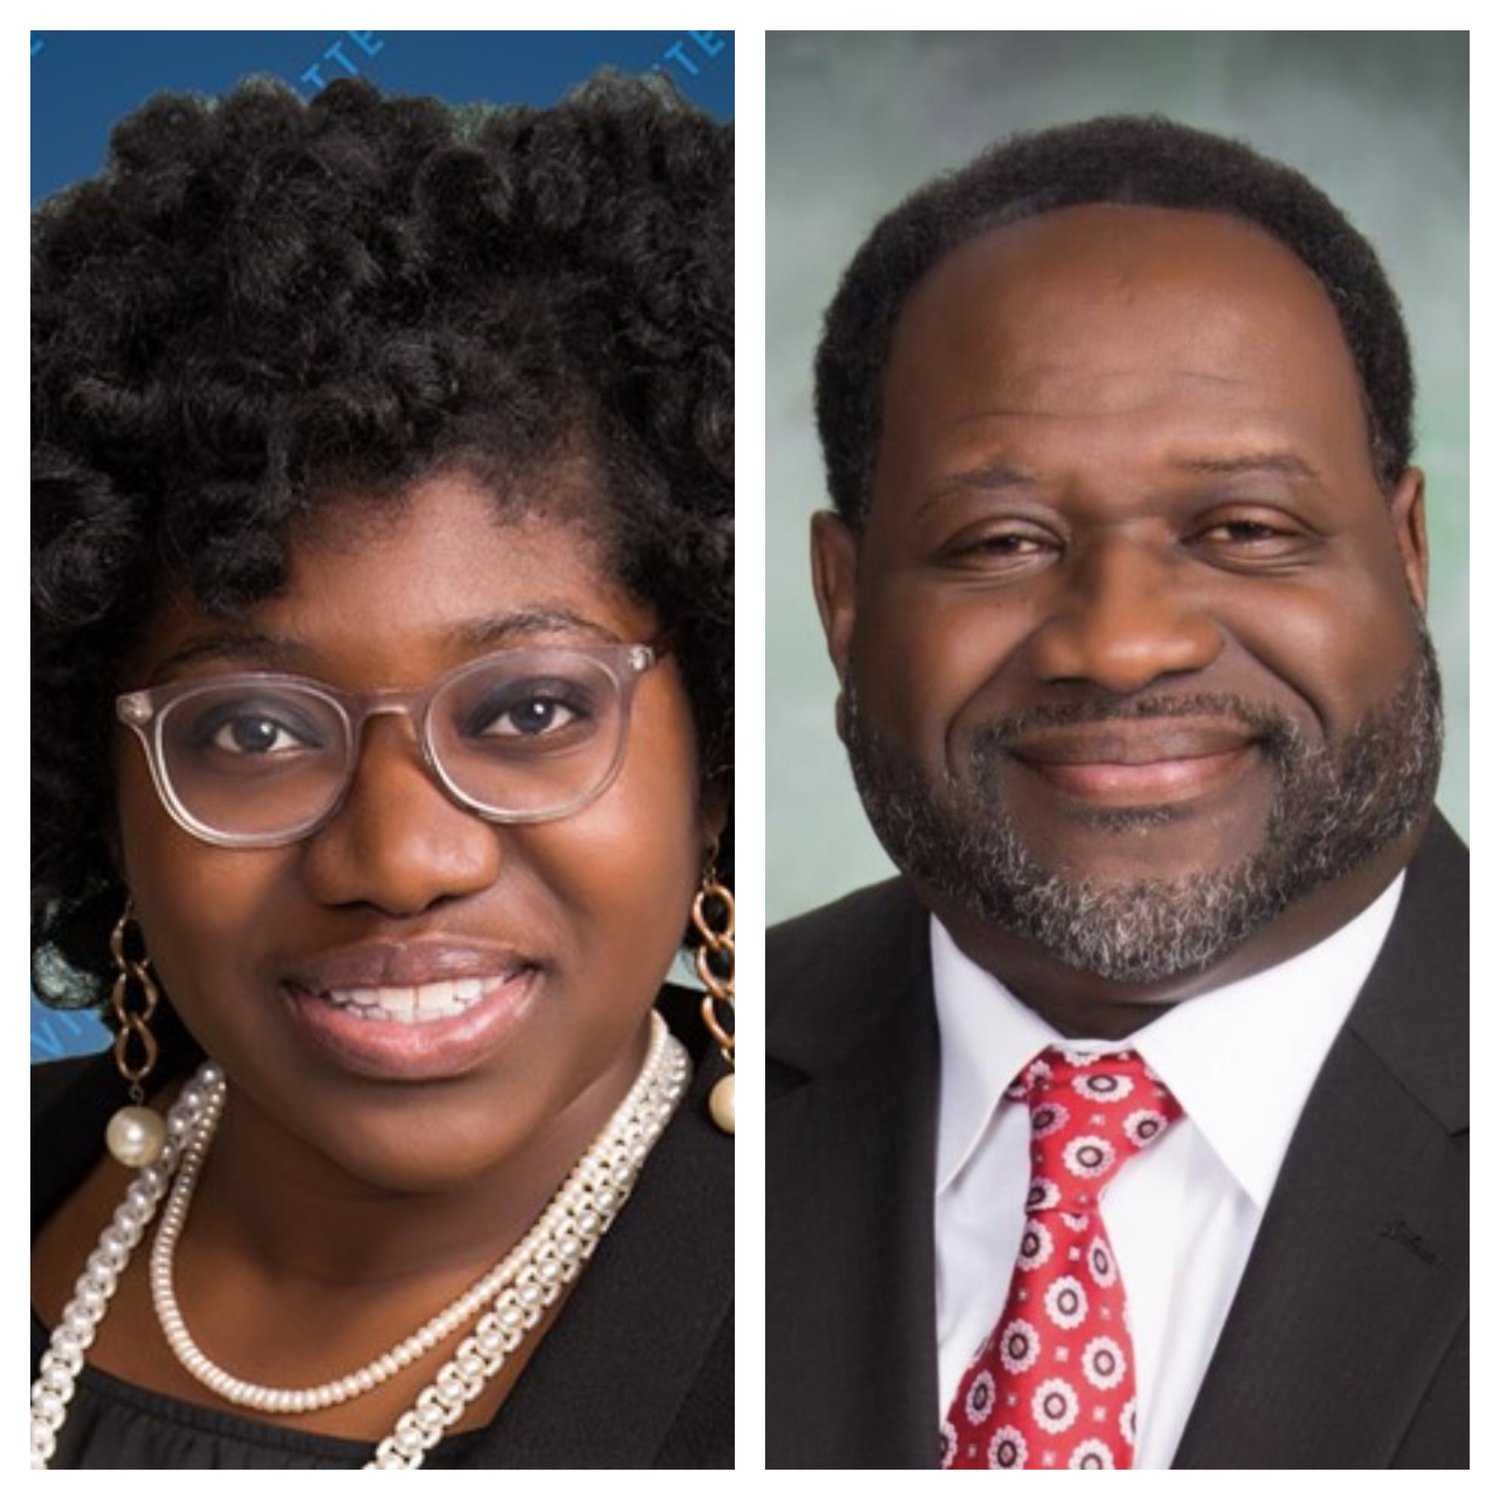 Incumbent Shakeyla Ingram and former Councilman Tyrone Williams are running for the District 2 seat on the Fayetteville City Council.